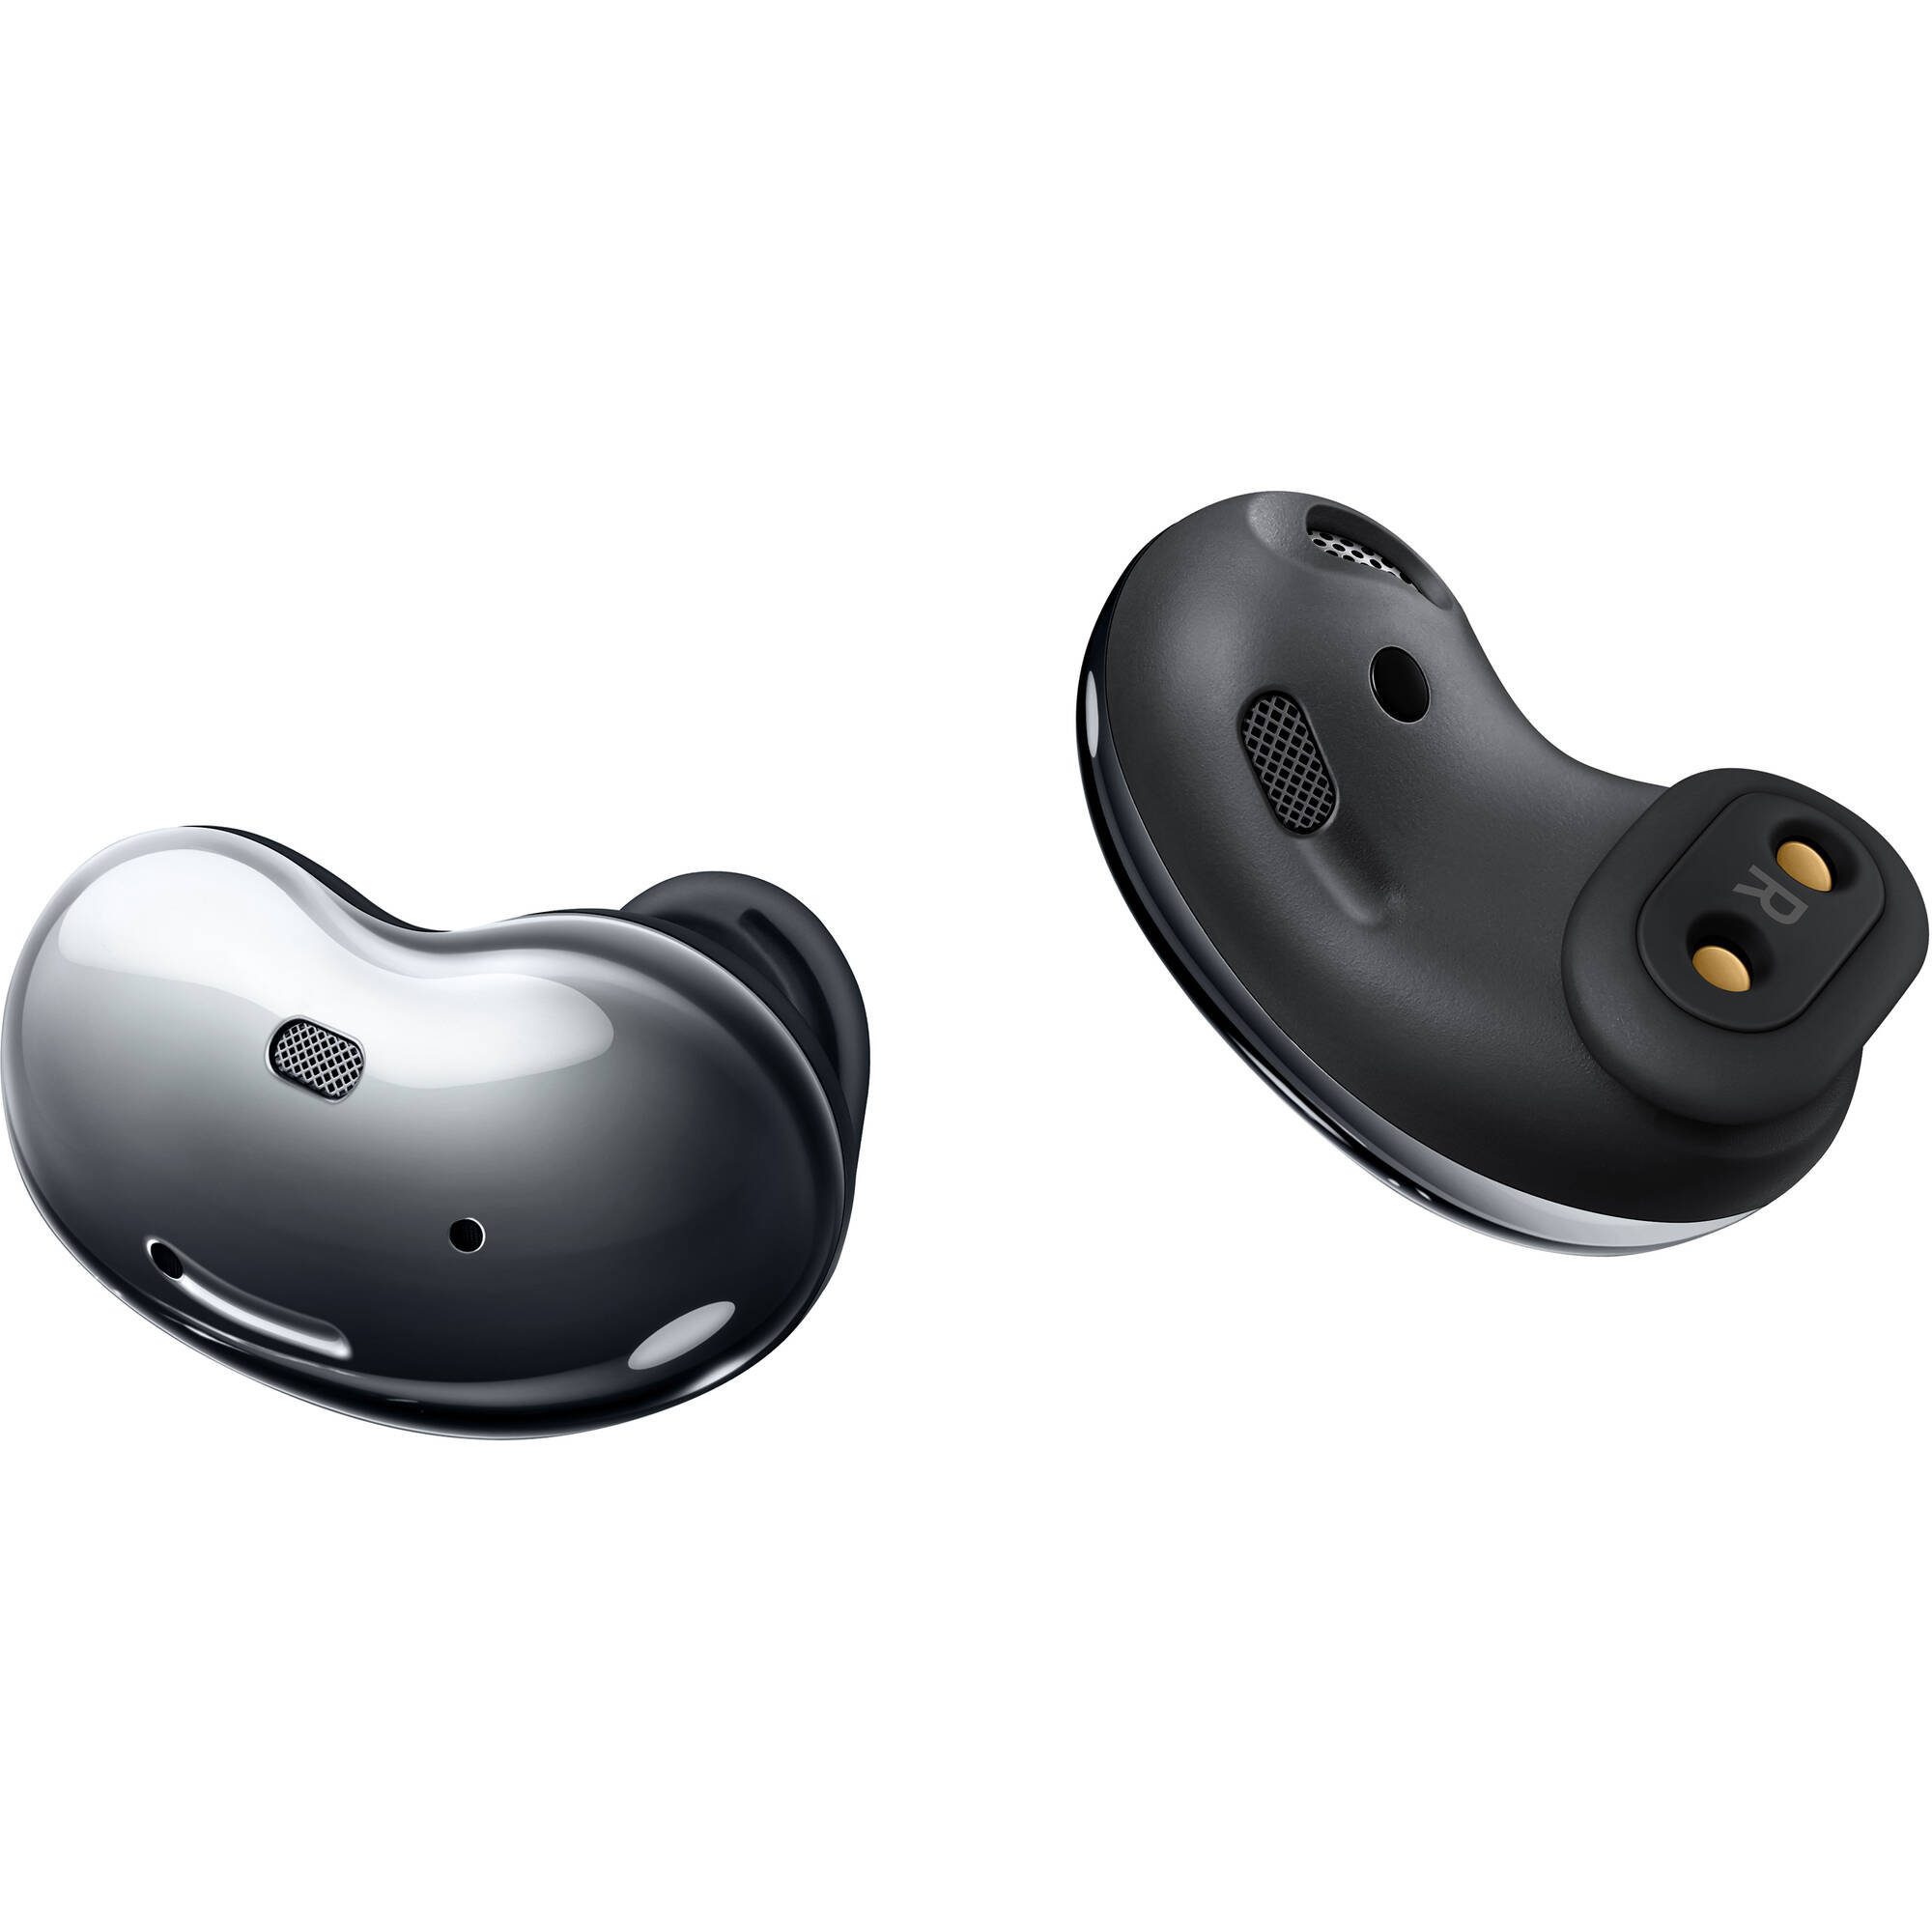 Samsung Galaxy Buds Live Noise-Canceling True Wireless auriculares auriculares (Black Mystic)